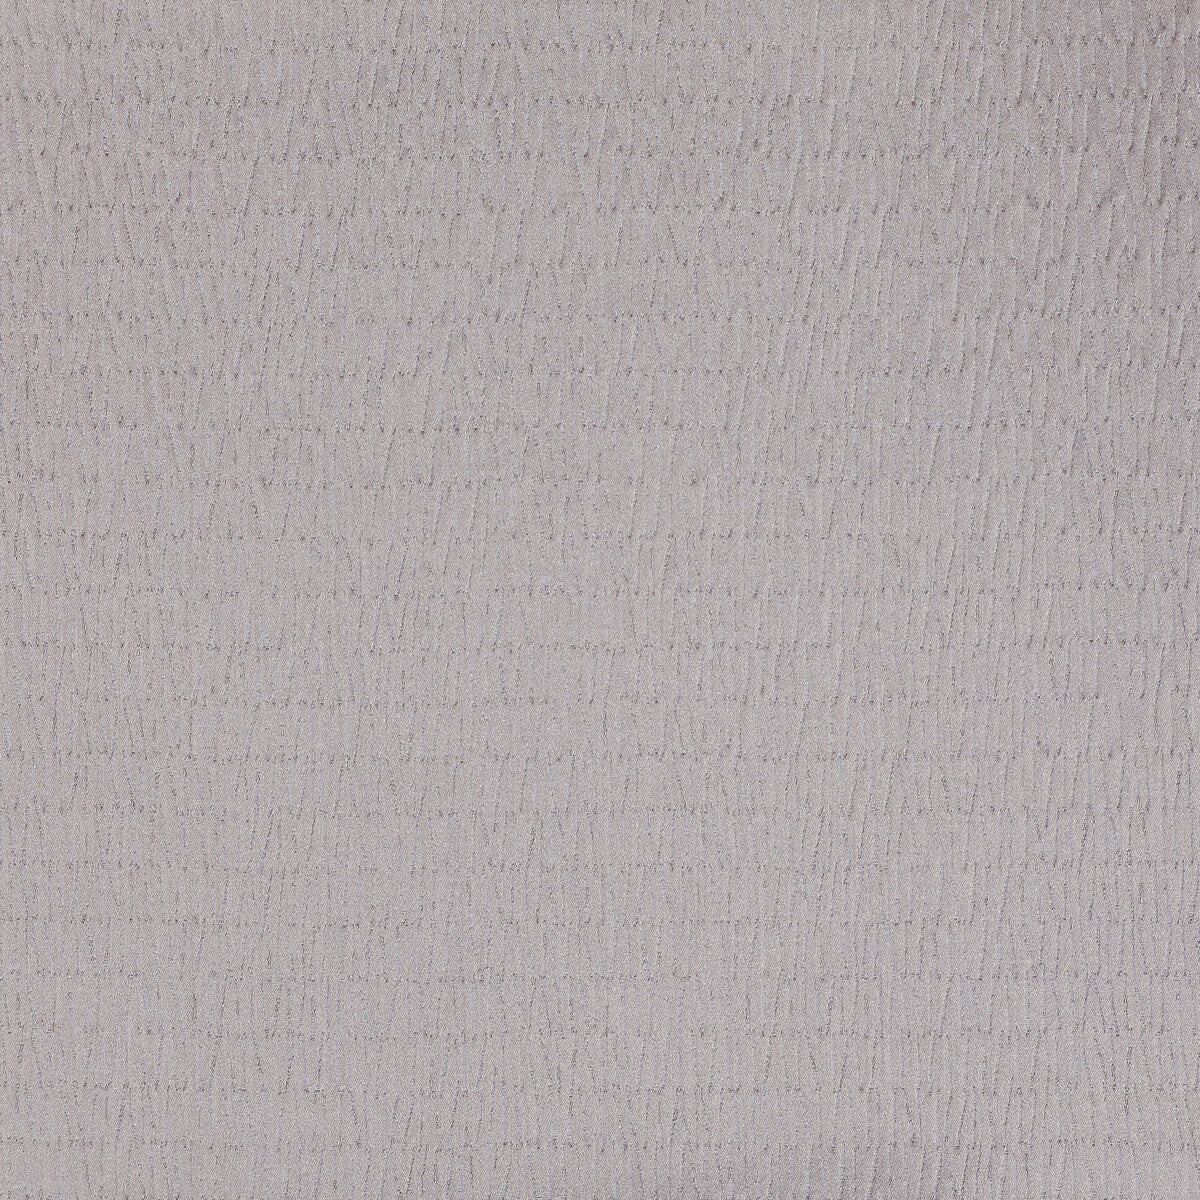 Earth fabric in 9 color - pattern LZ-30217.09.0 - by Kravet Design in the Lizzo collection